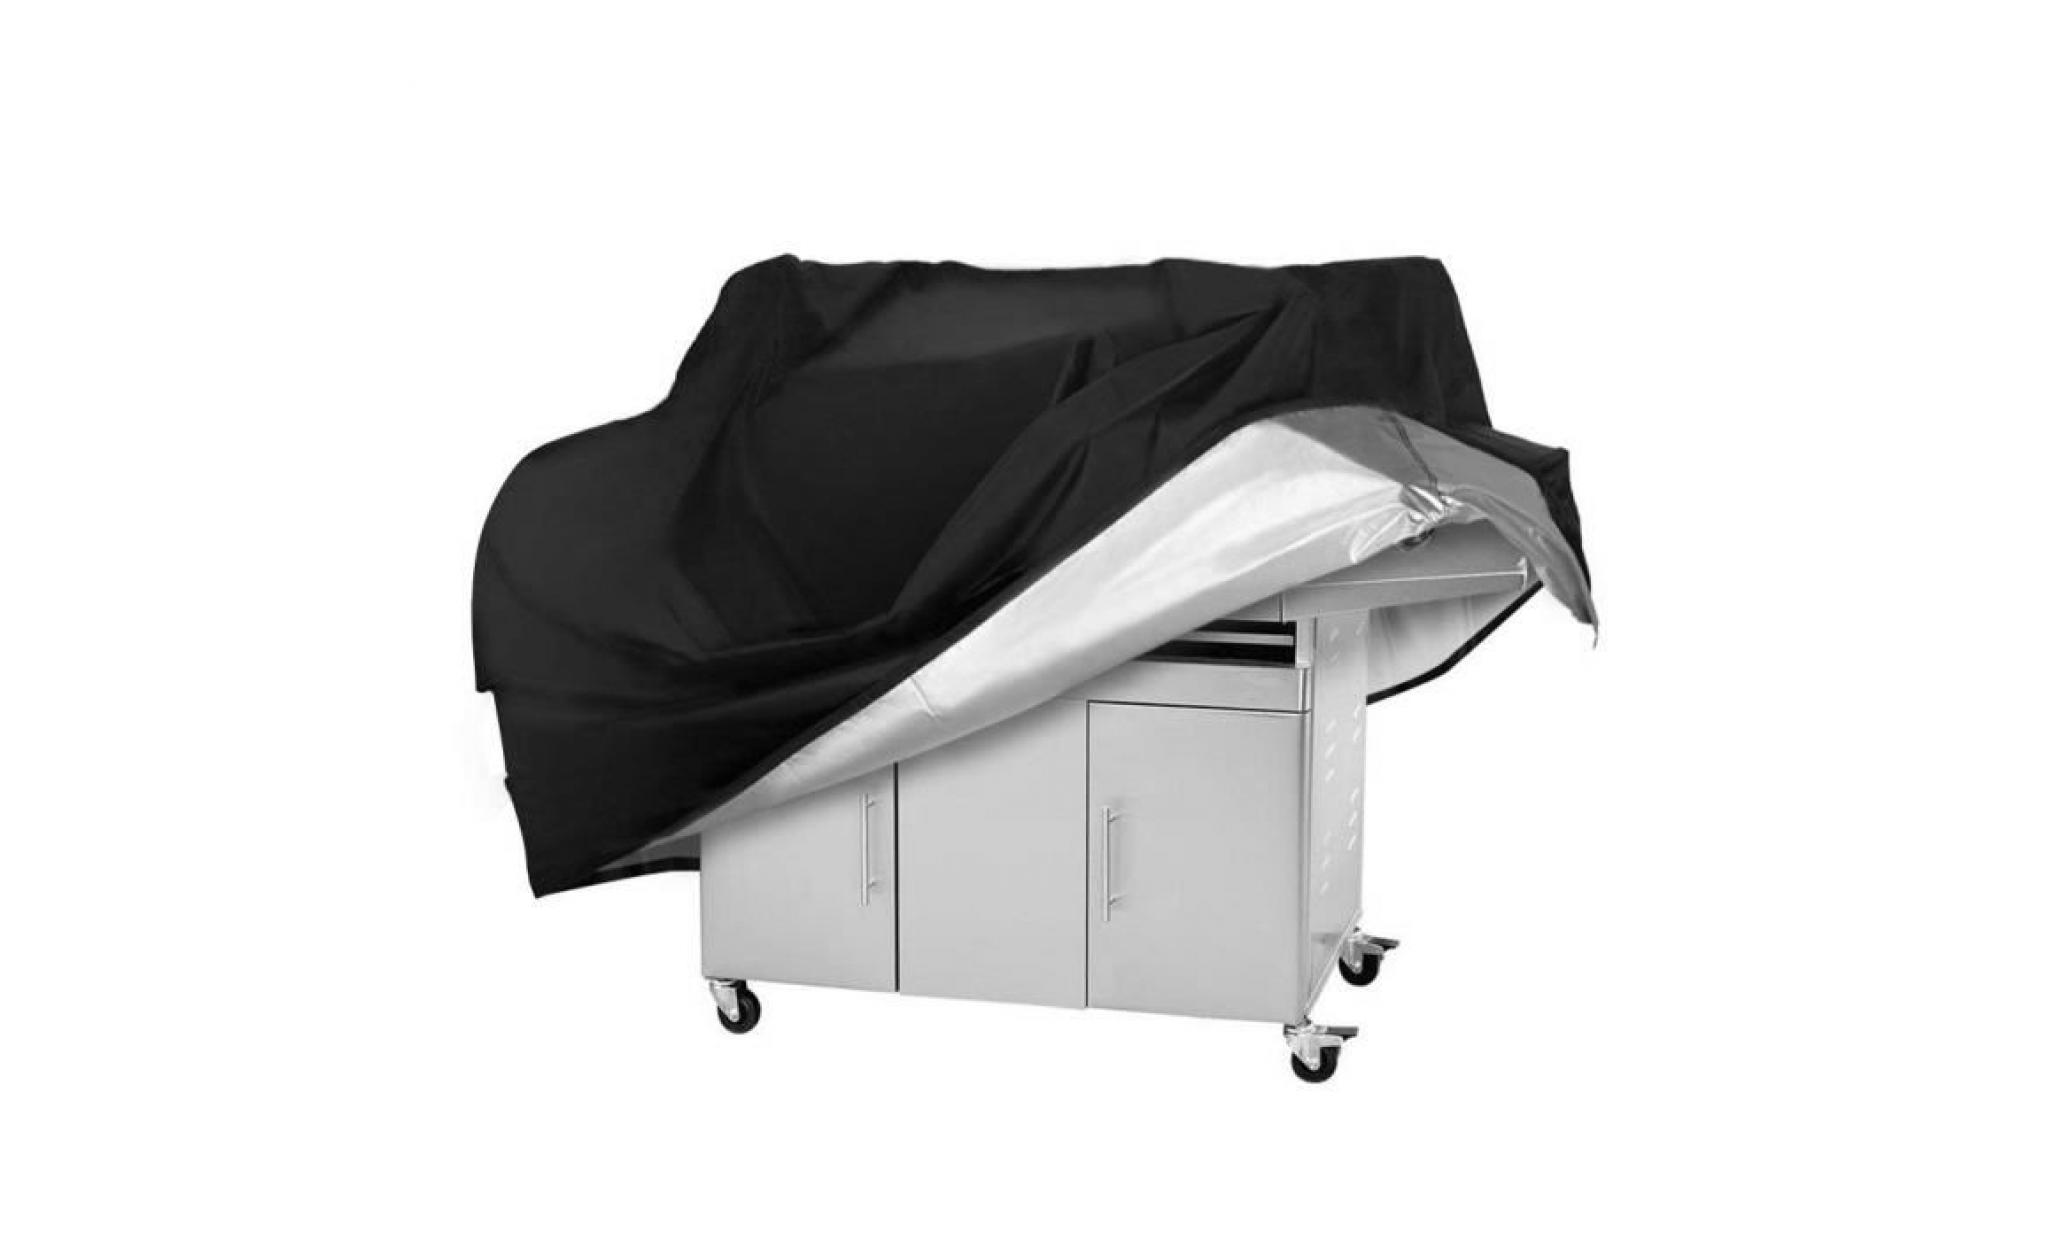 ghb housse barbecue bâche barbecue protection barbecue anti poussière anti uv anti pluie 145 x 61 x 117cm